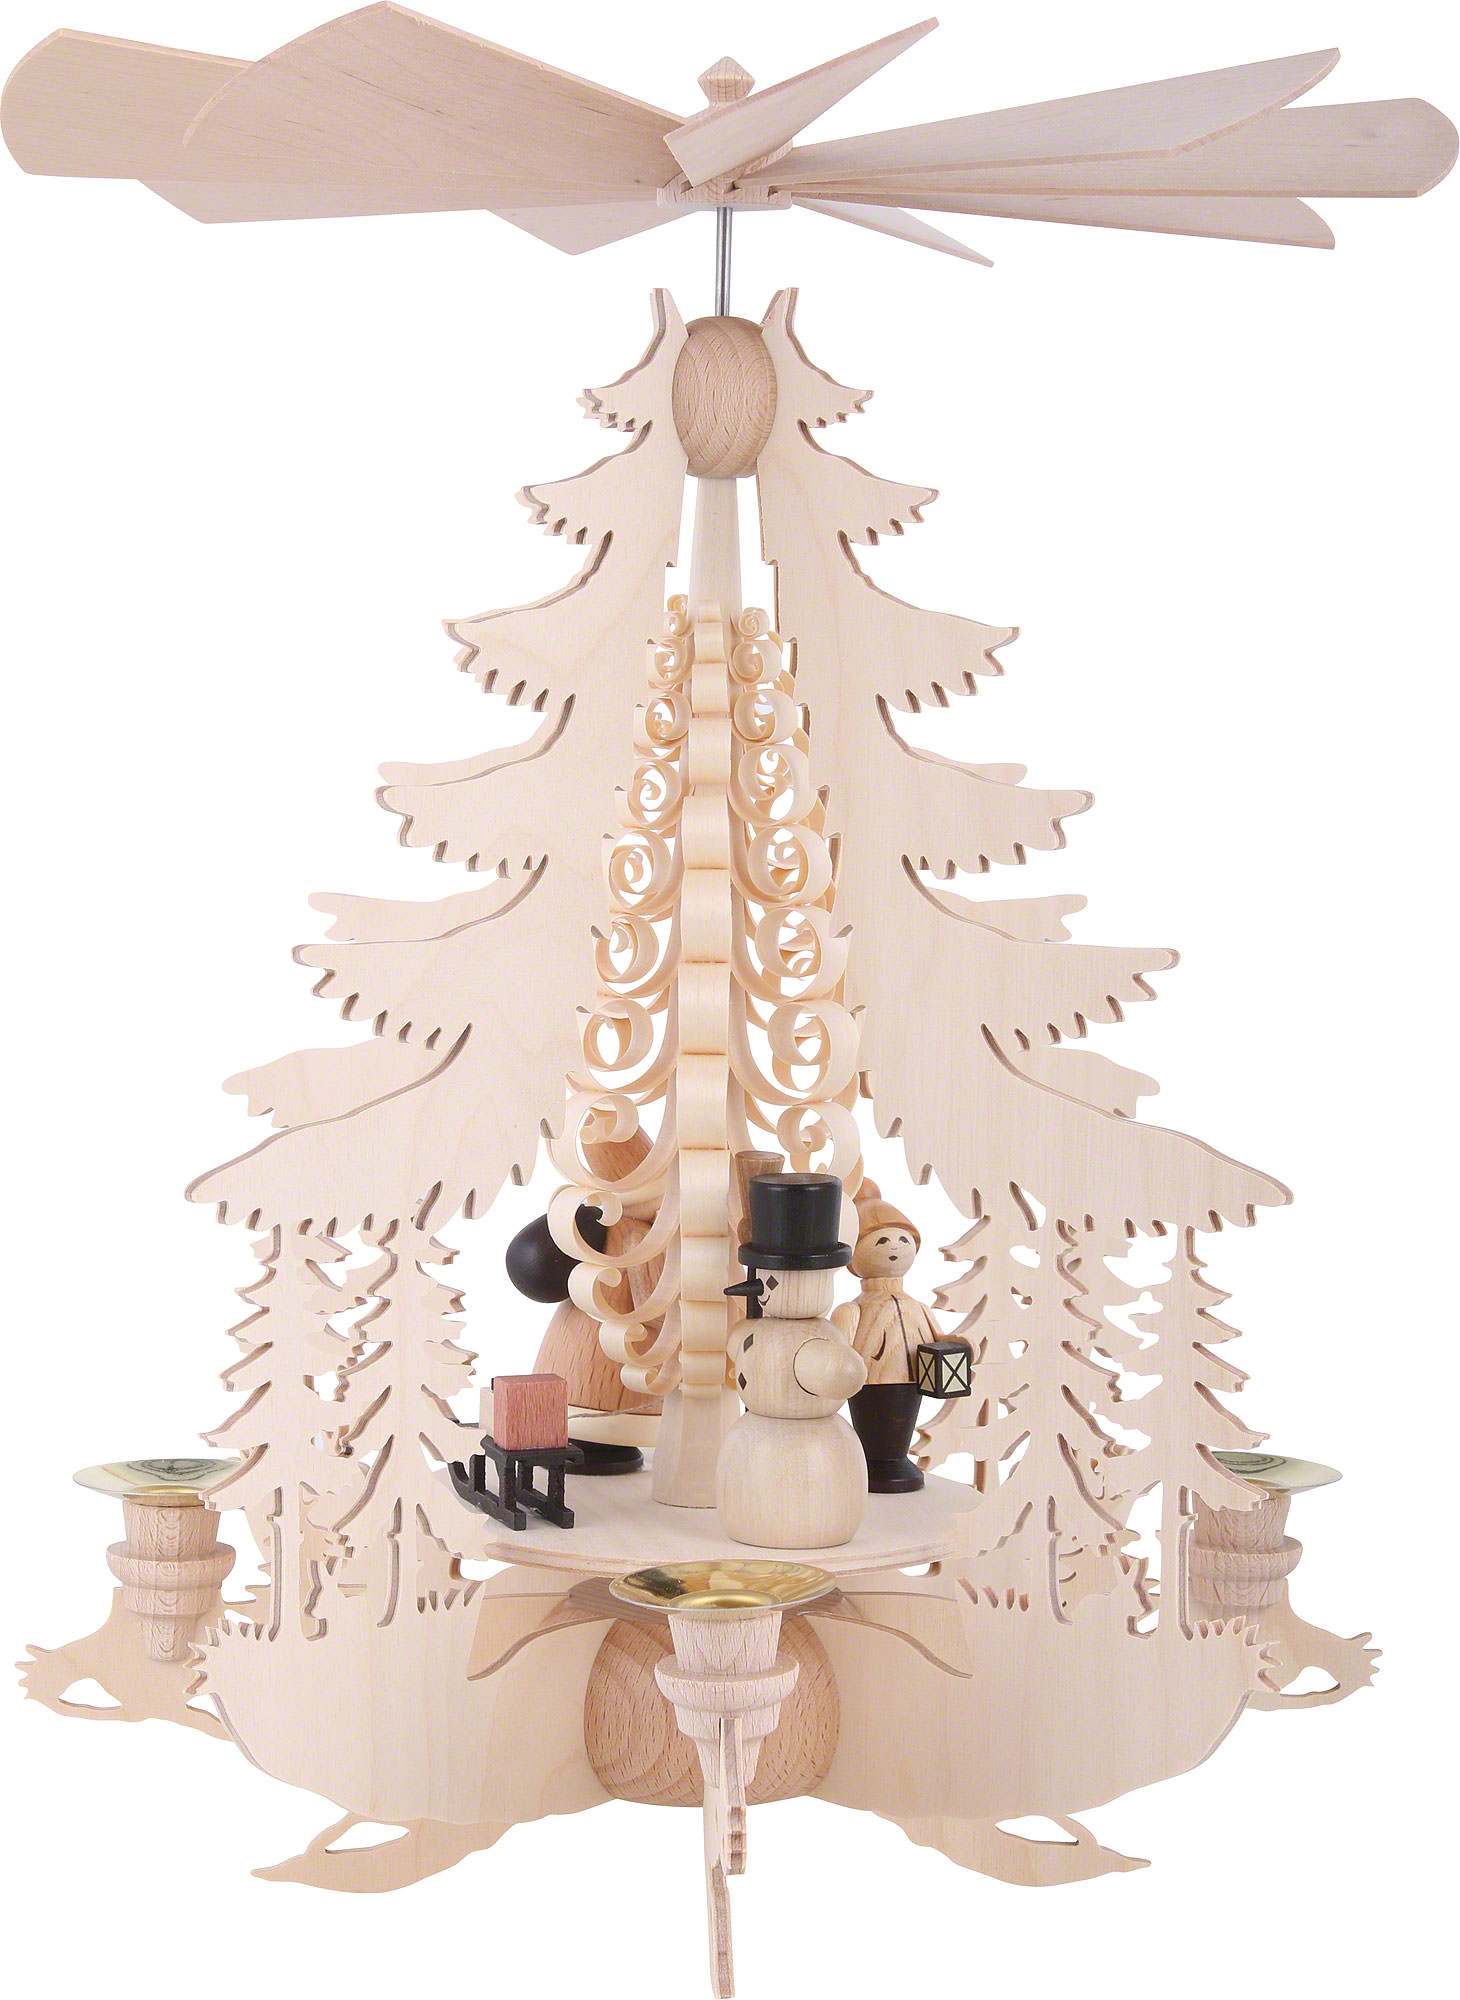 1-Tier Pyramid - Christmas Figures (35 cm/14in) by Taulin